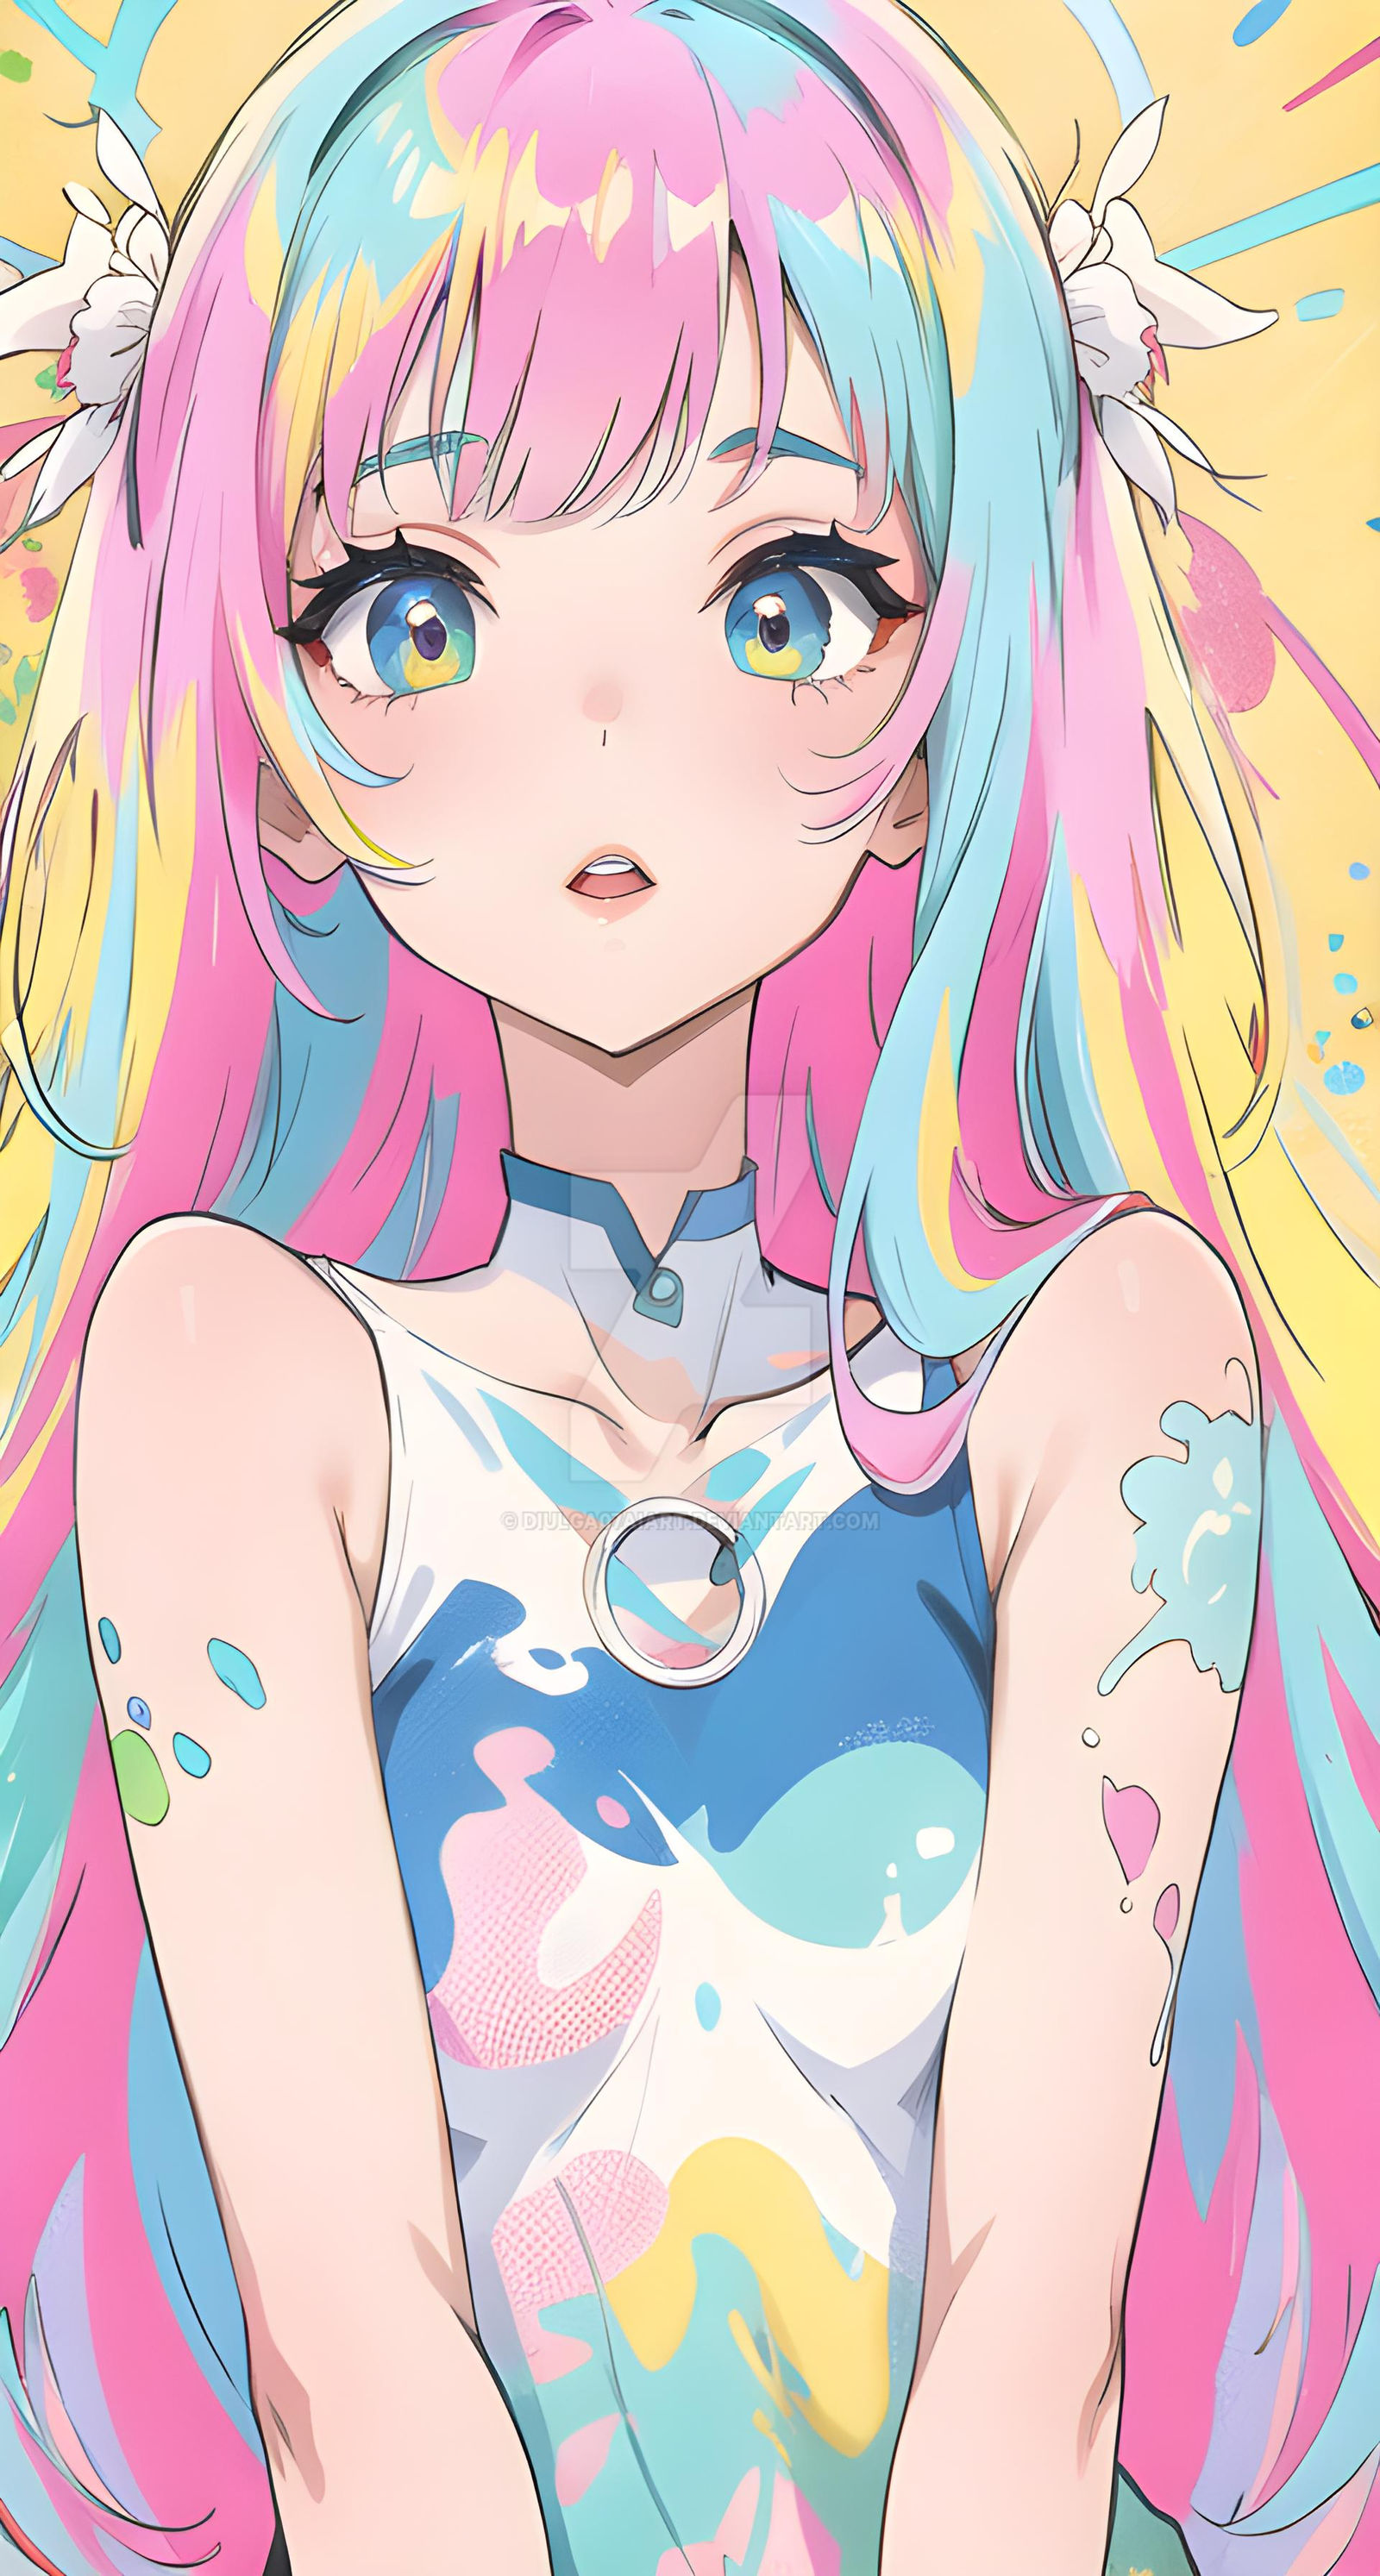 Vibrant and colorful girl wallpaper set by Diulga07aiart on DeviantArt